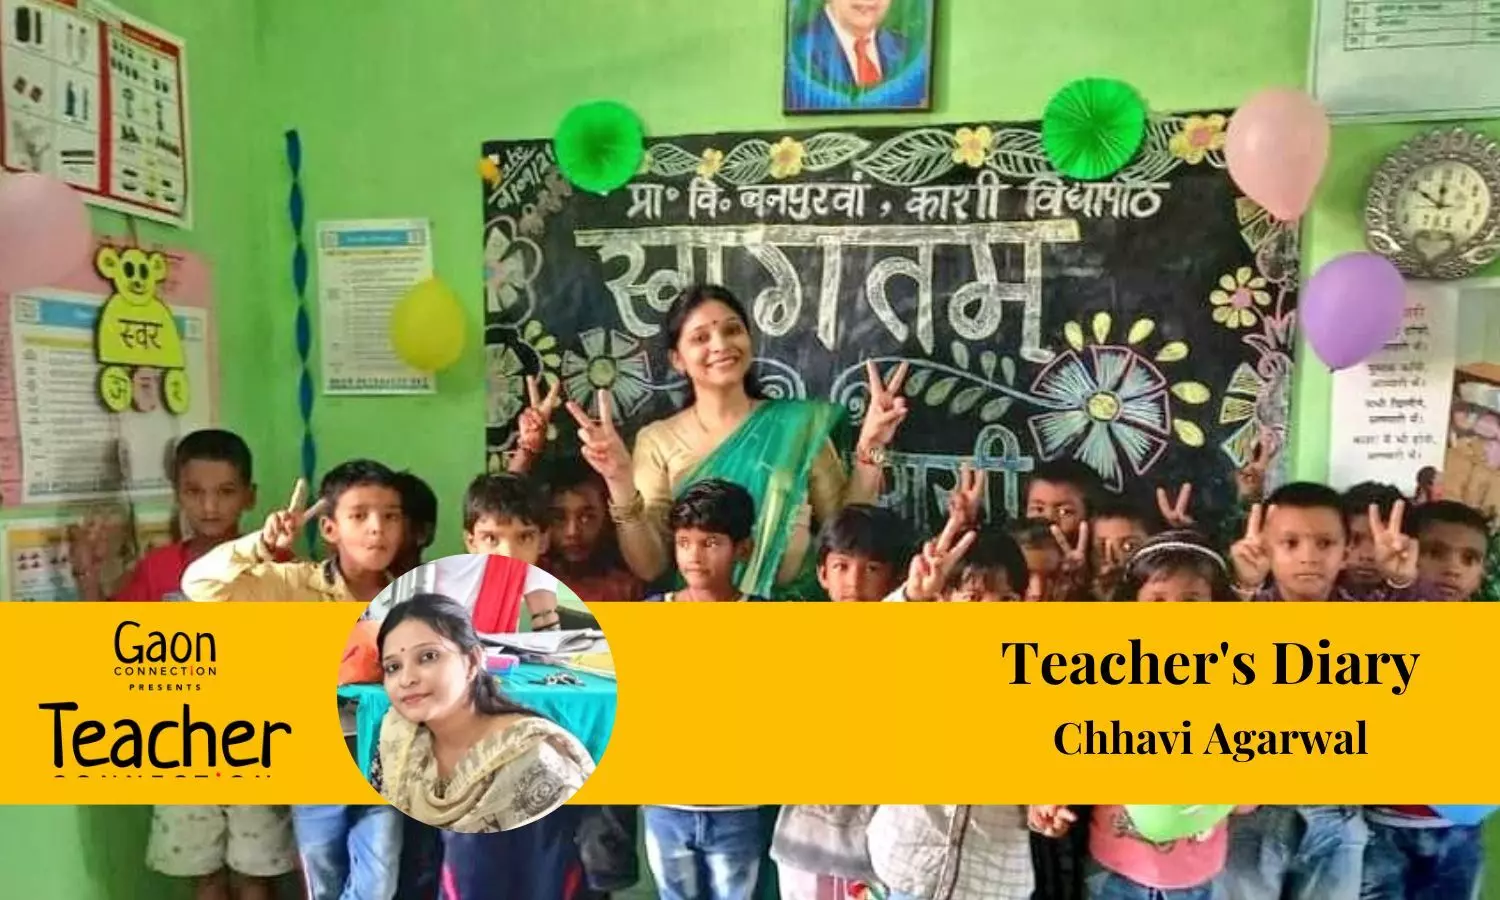 Teachers Diary: Reaching out to the mothers helped increase attendance in this school